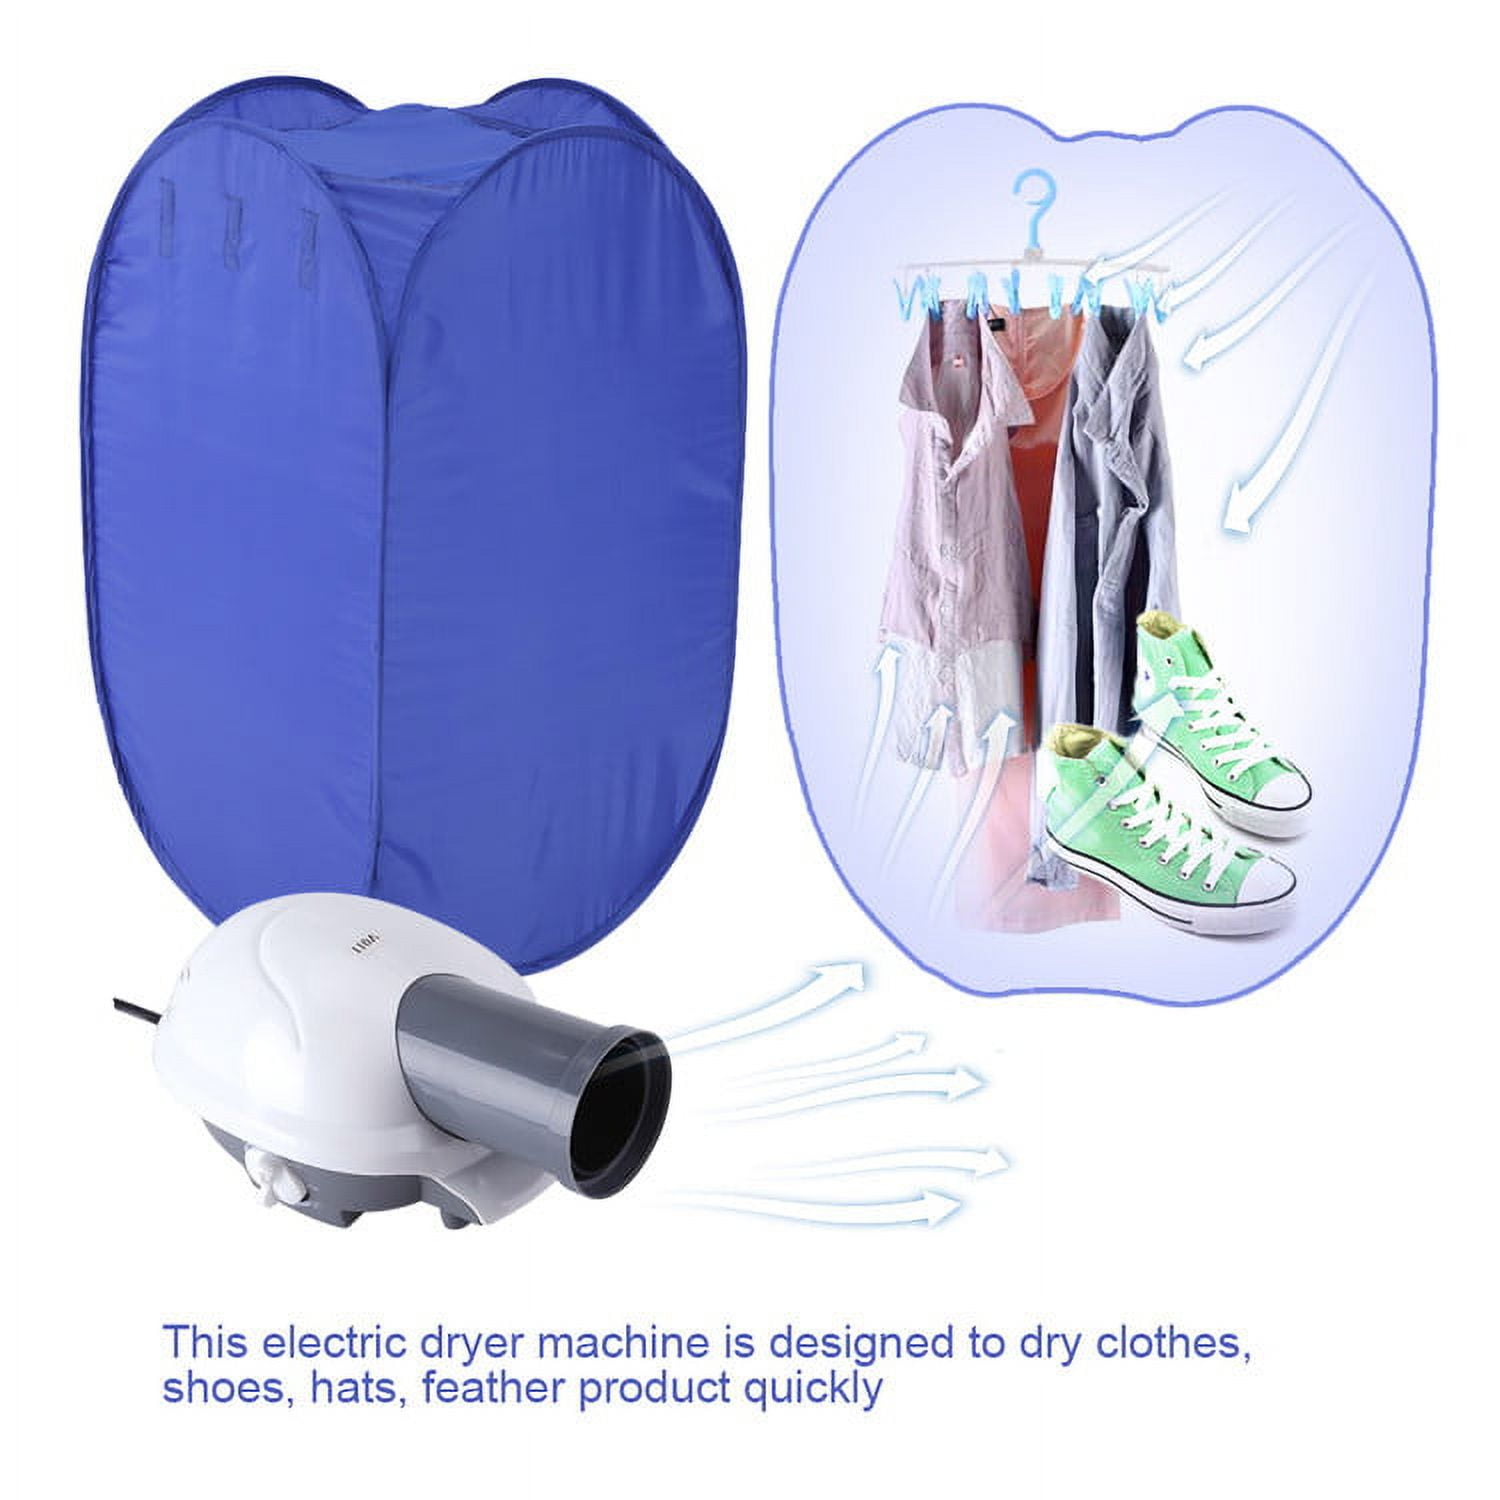 European Standard Plug-in Foldable Clothes Dryer, Smart Touch Screen, Quick  Drying In 40 Minutes, Regular Drying In 1-8 Hours, Dual Modes,  Antibacterial And Mite Removal, Foldable Storage, Quick Heating In 5  Minutes 